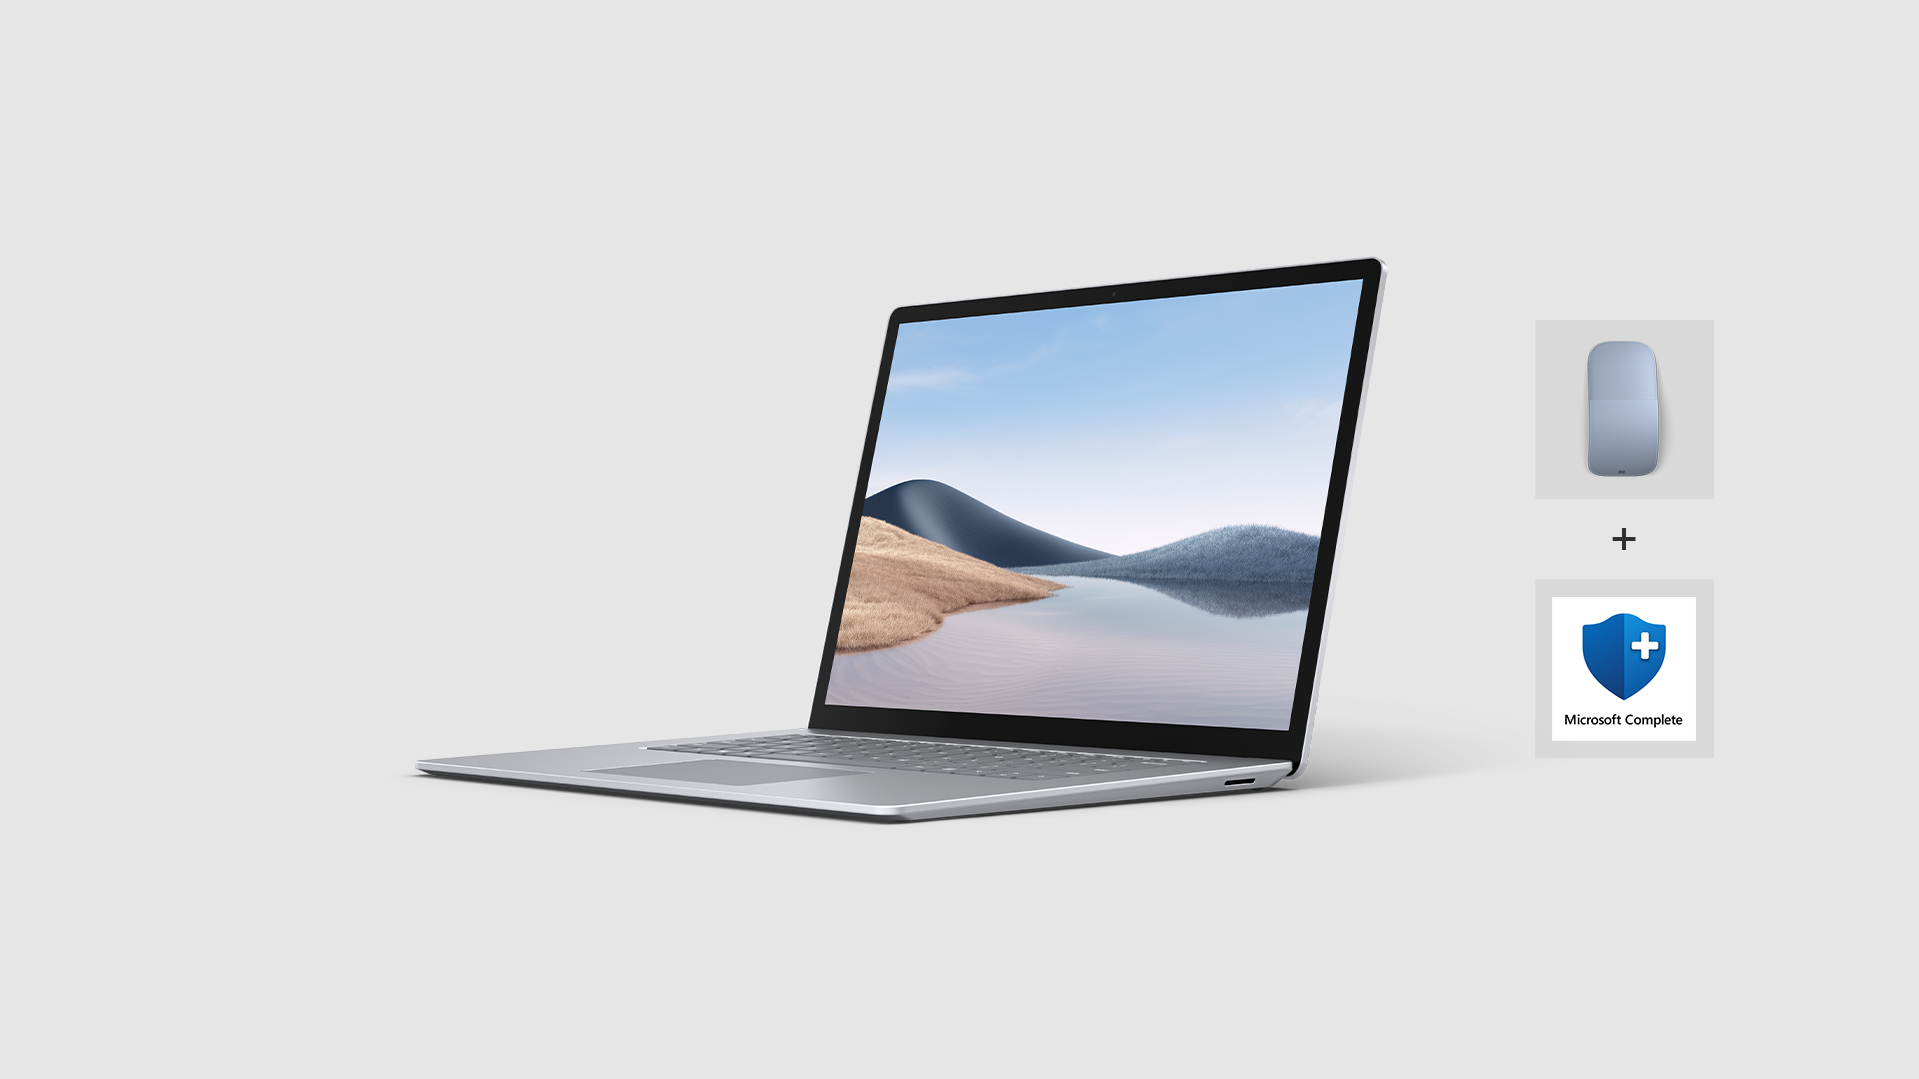 Surface Laptop 4 for Business device and graphical icons for Microsoft 365 and Microsoft Complete Protection Plan.